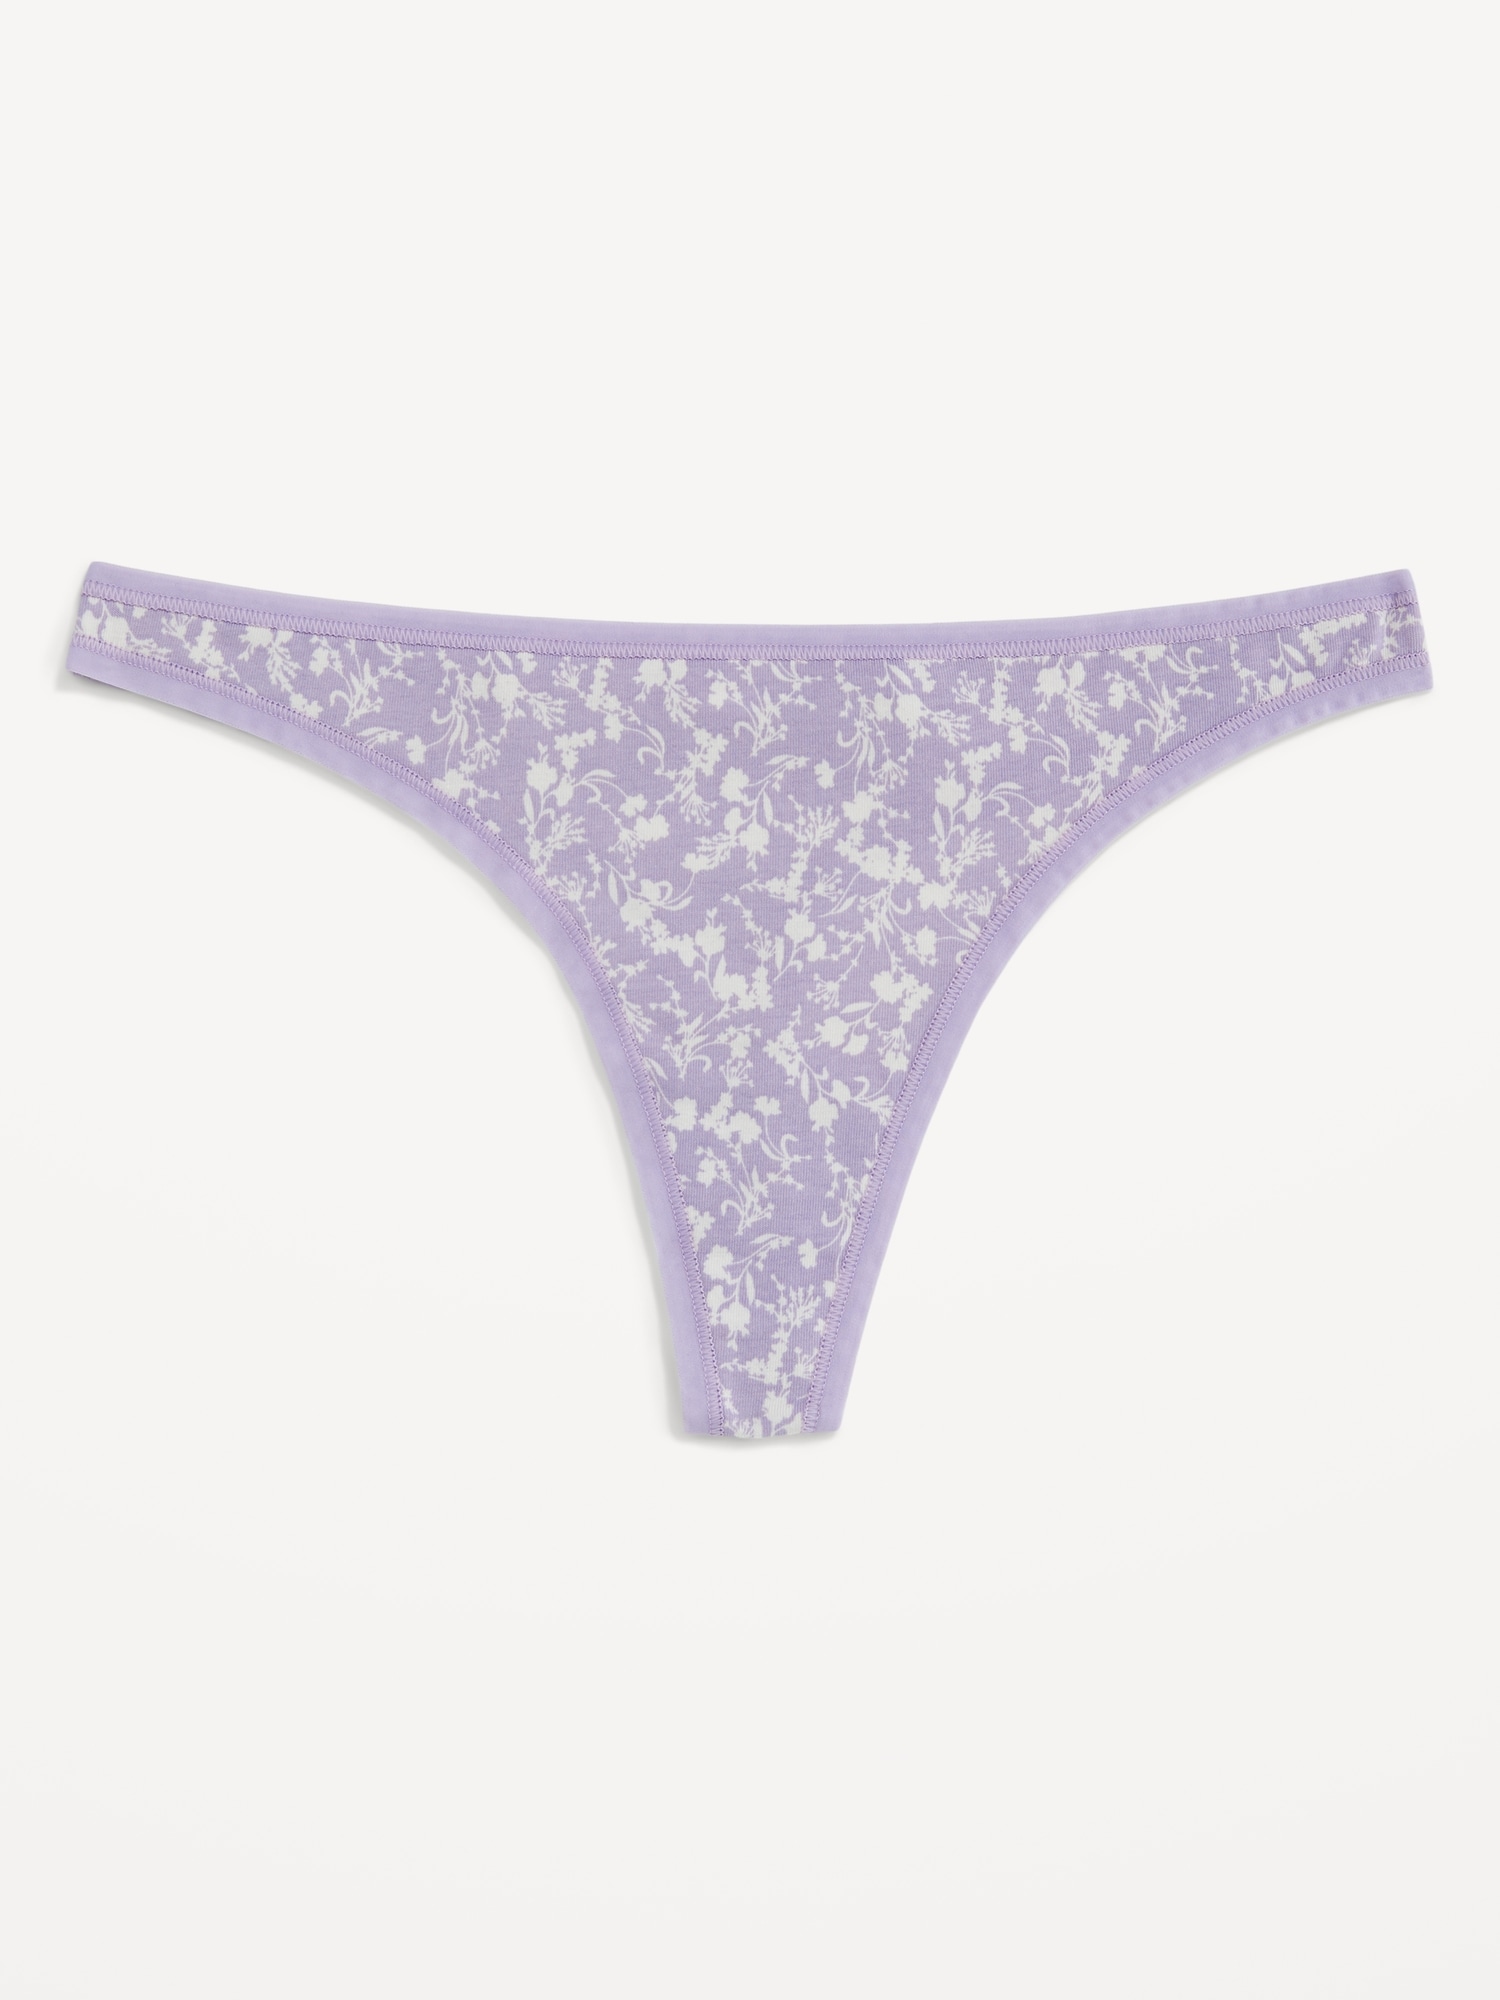 Old Navy Matching Low-Rise Classic Thong Underwear purple. 1